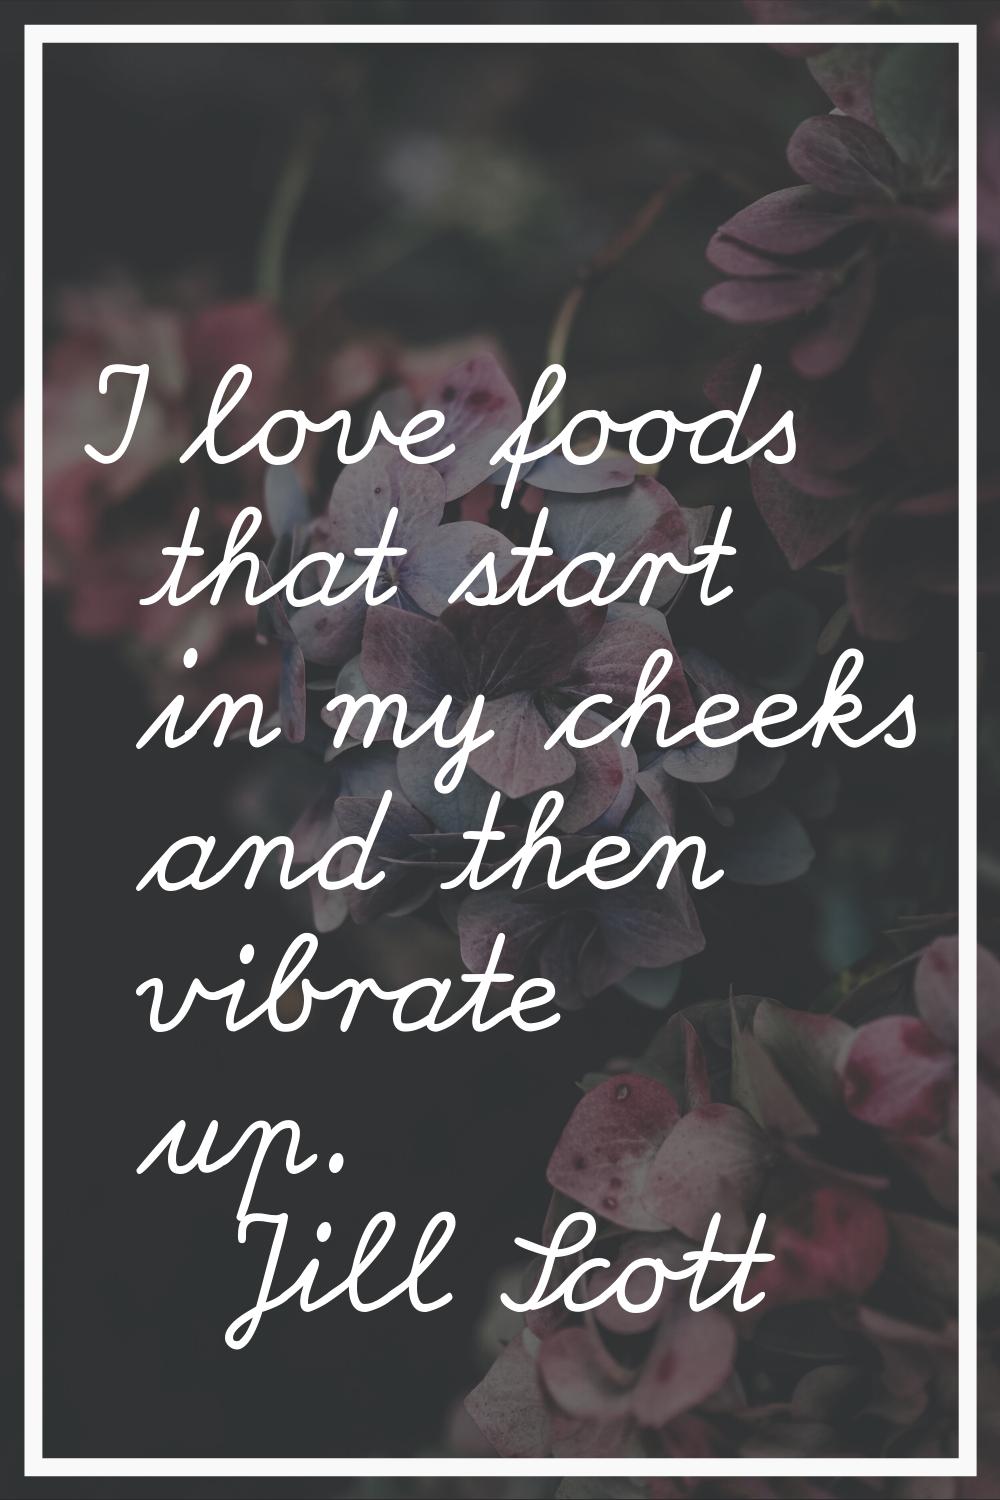 I love foods that start in my cheeks and then vibrate up.